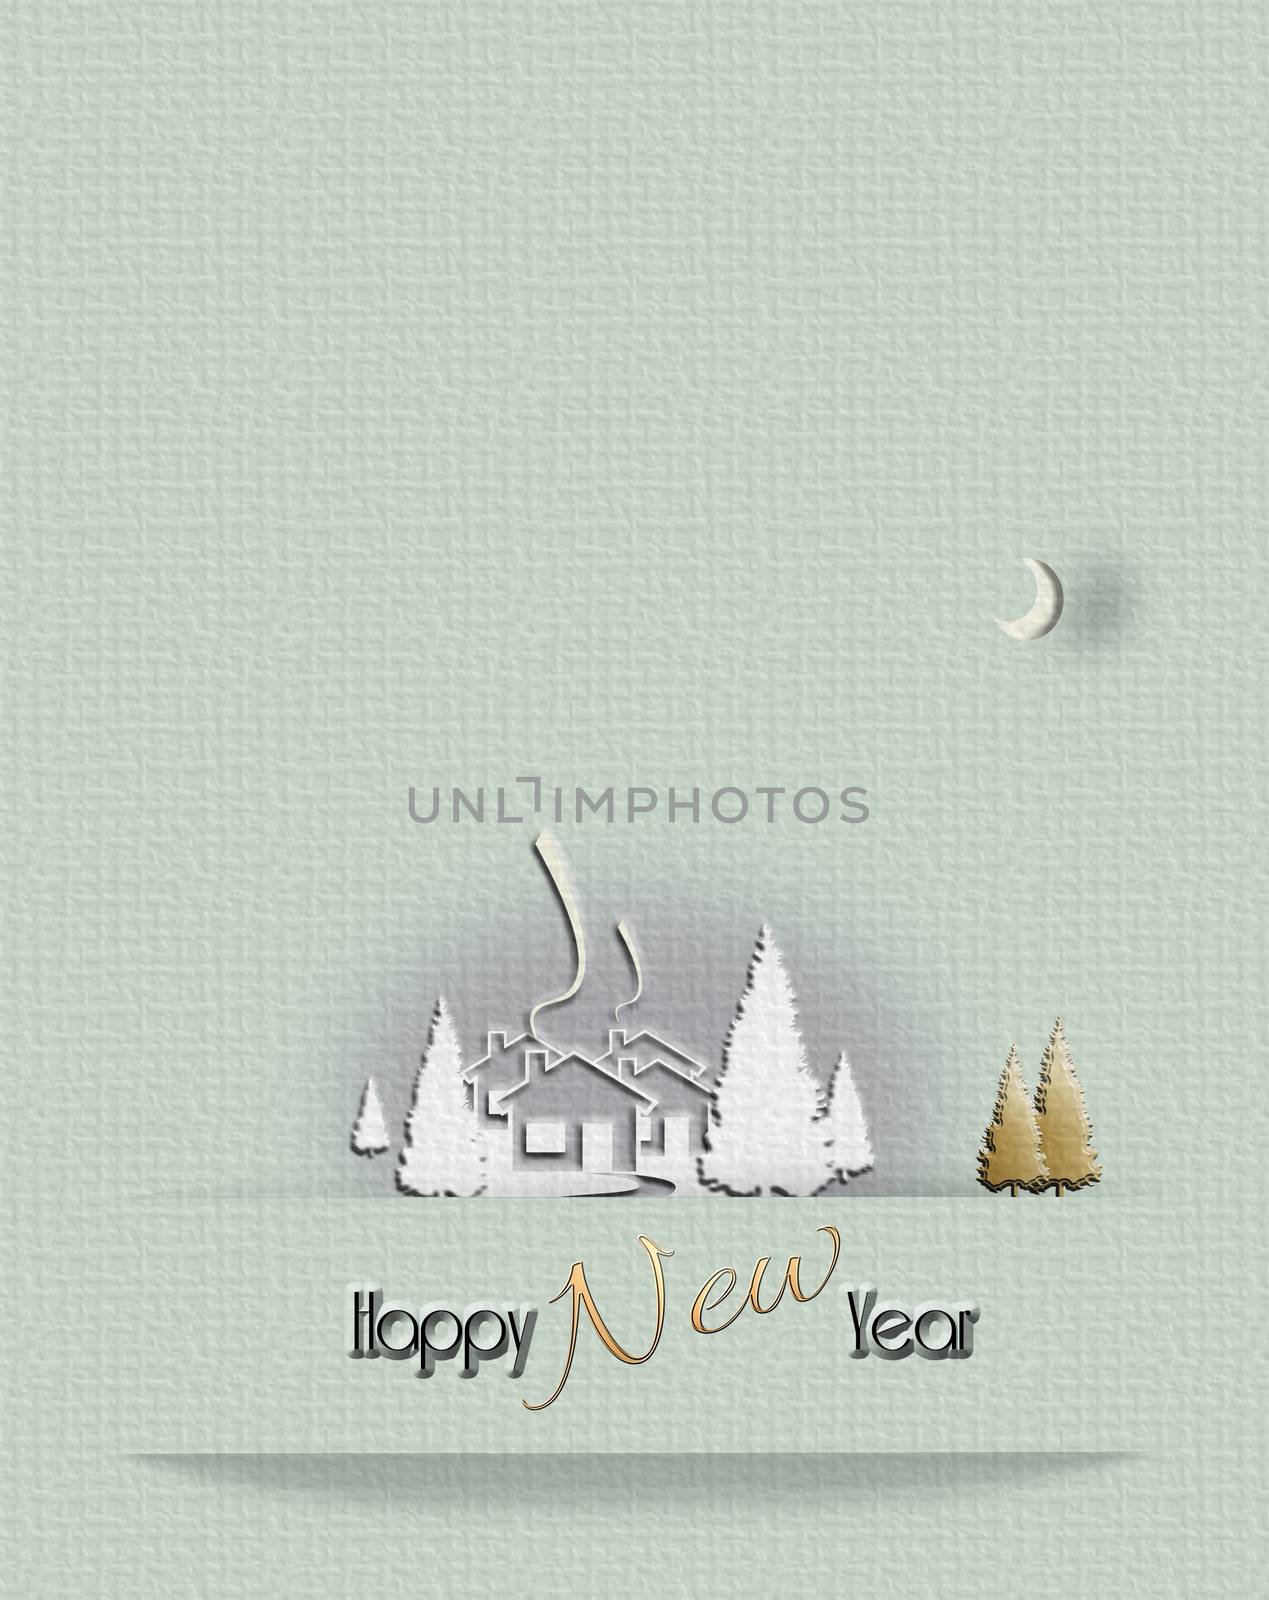 Beautiful minimalist Christmas 2021 New Year country winter landscape with houses, moon, gold Christmas tree in pastel green colour. Text Happy New Year. 3D render, place for text.